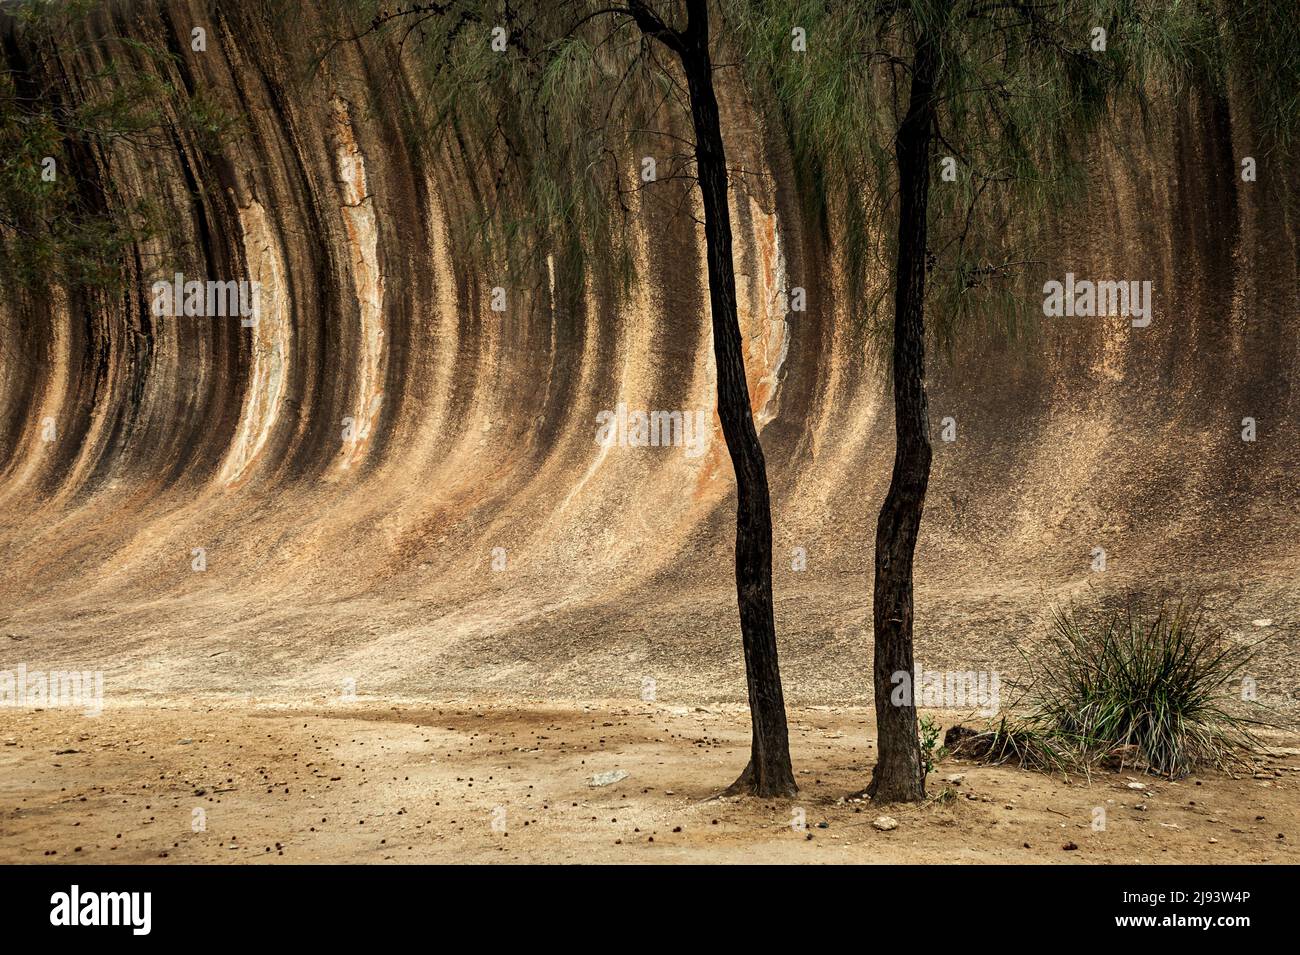 Outstanding Wave Rock in Western Australia's Outback. Stock Photo